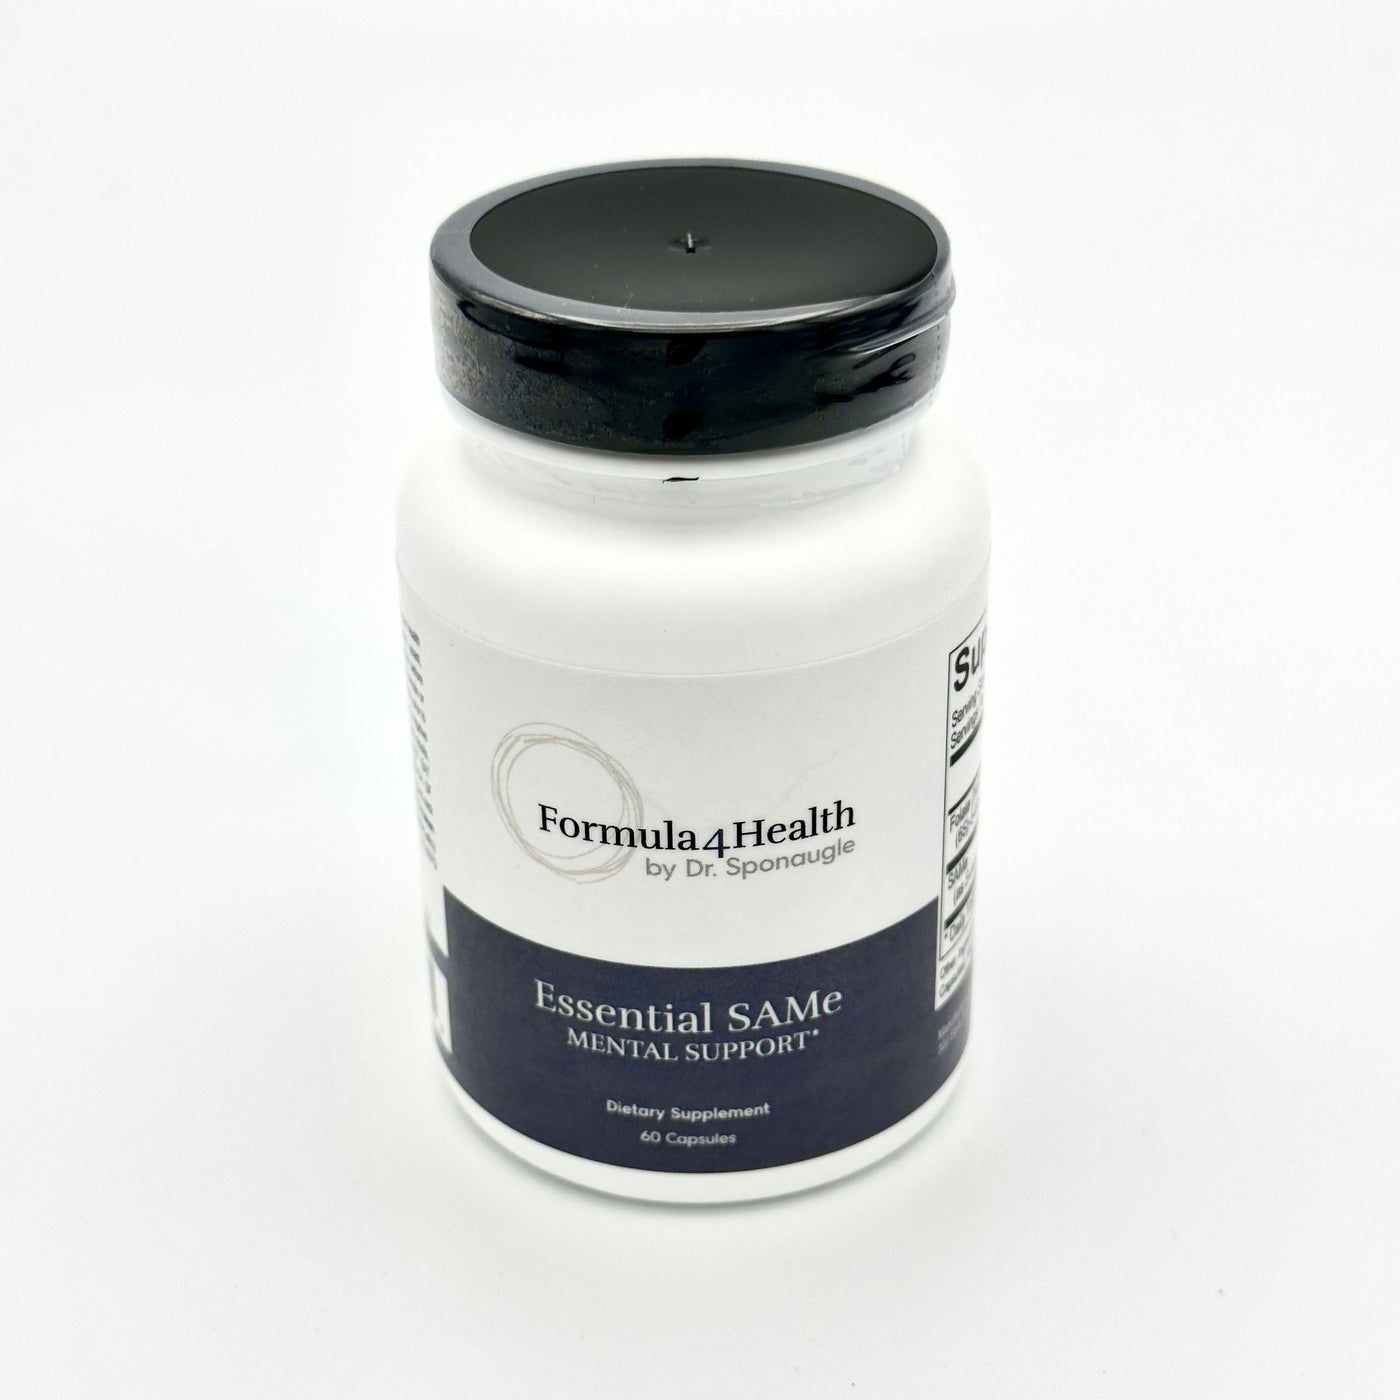 Essential SAMe by  Formula 4 Health. Available for online purchase at  Formula For Health.